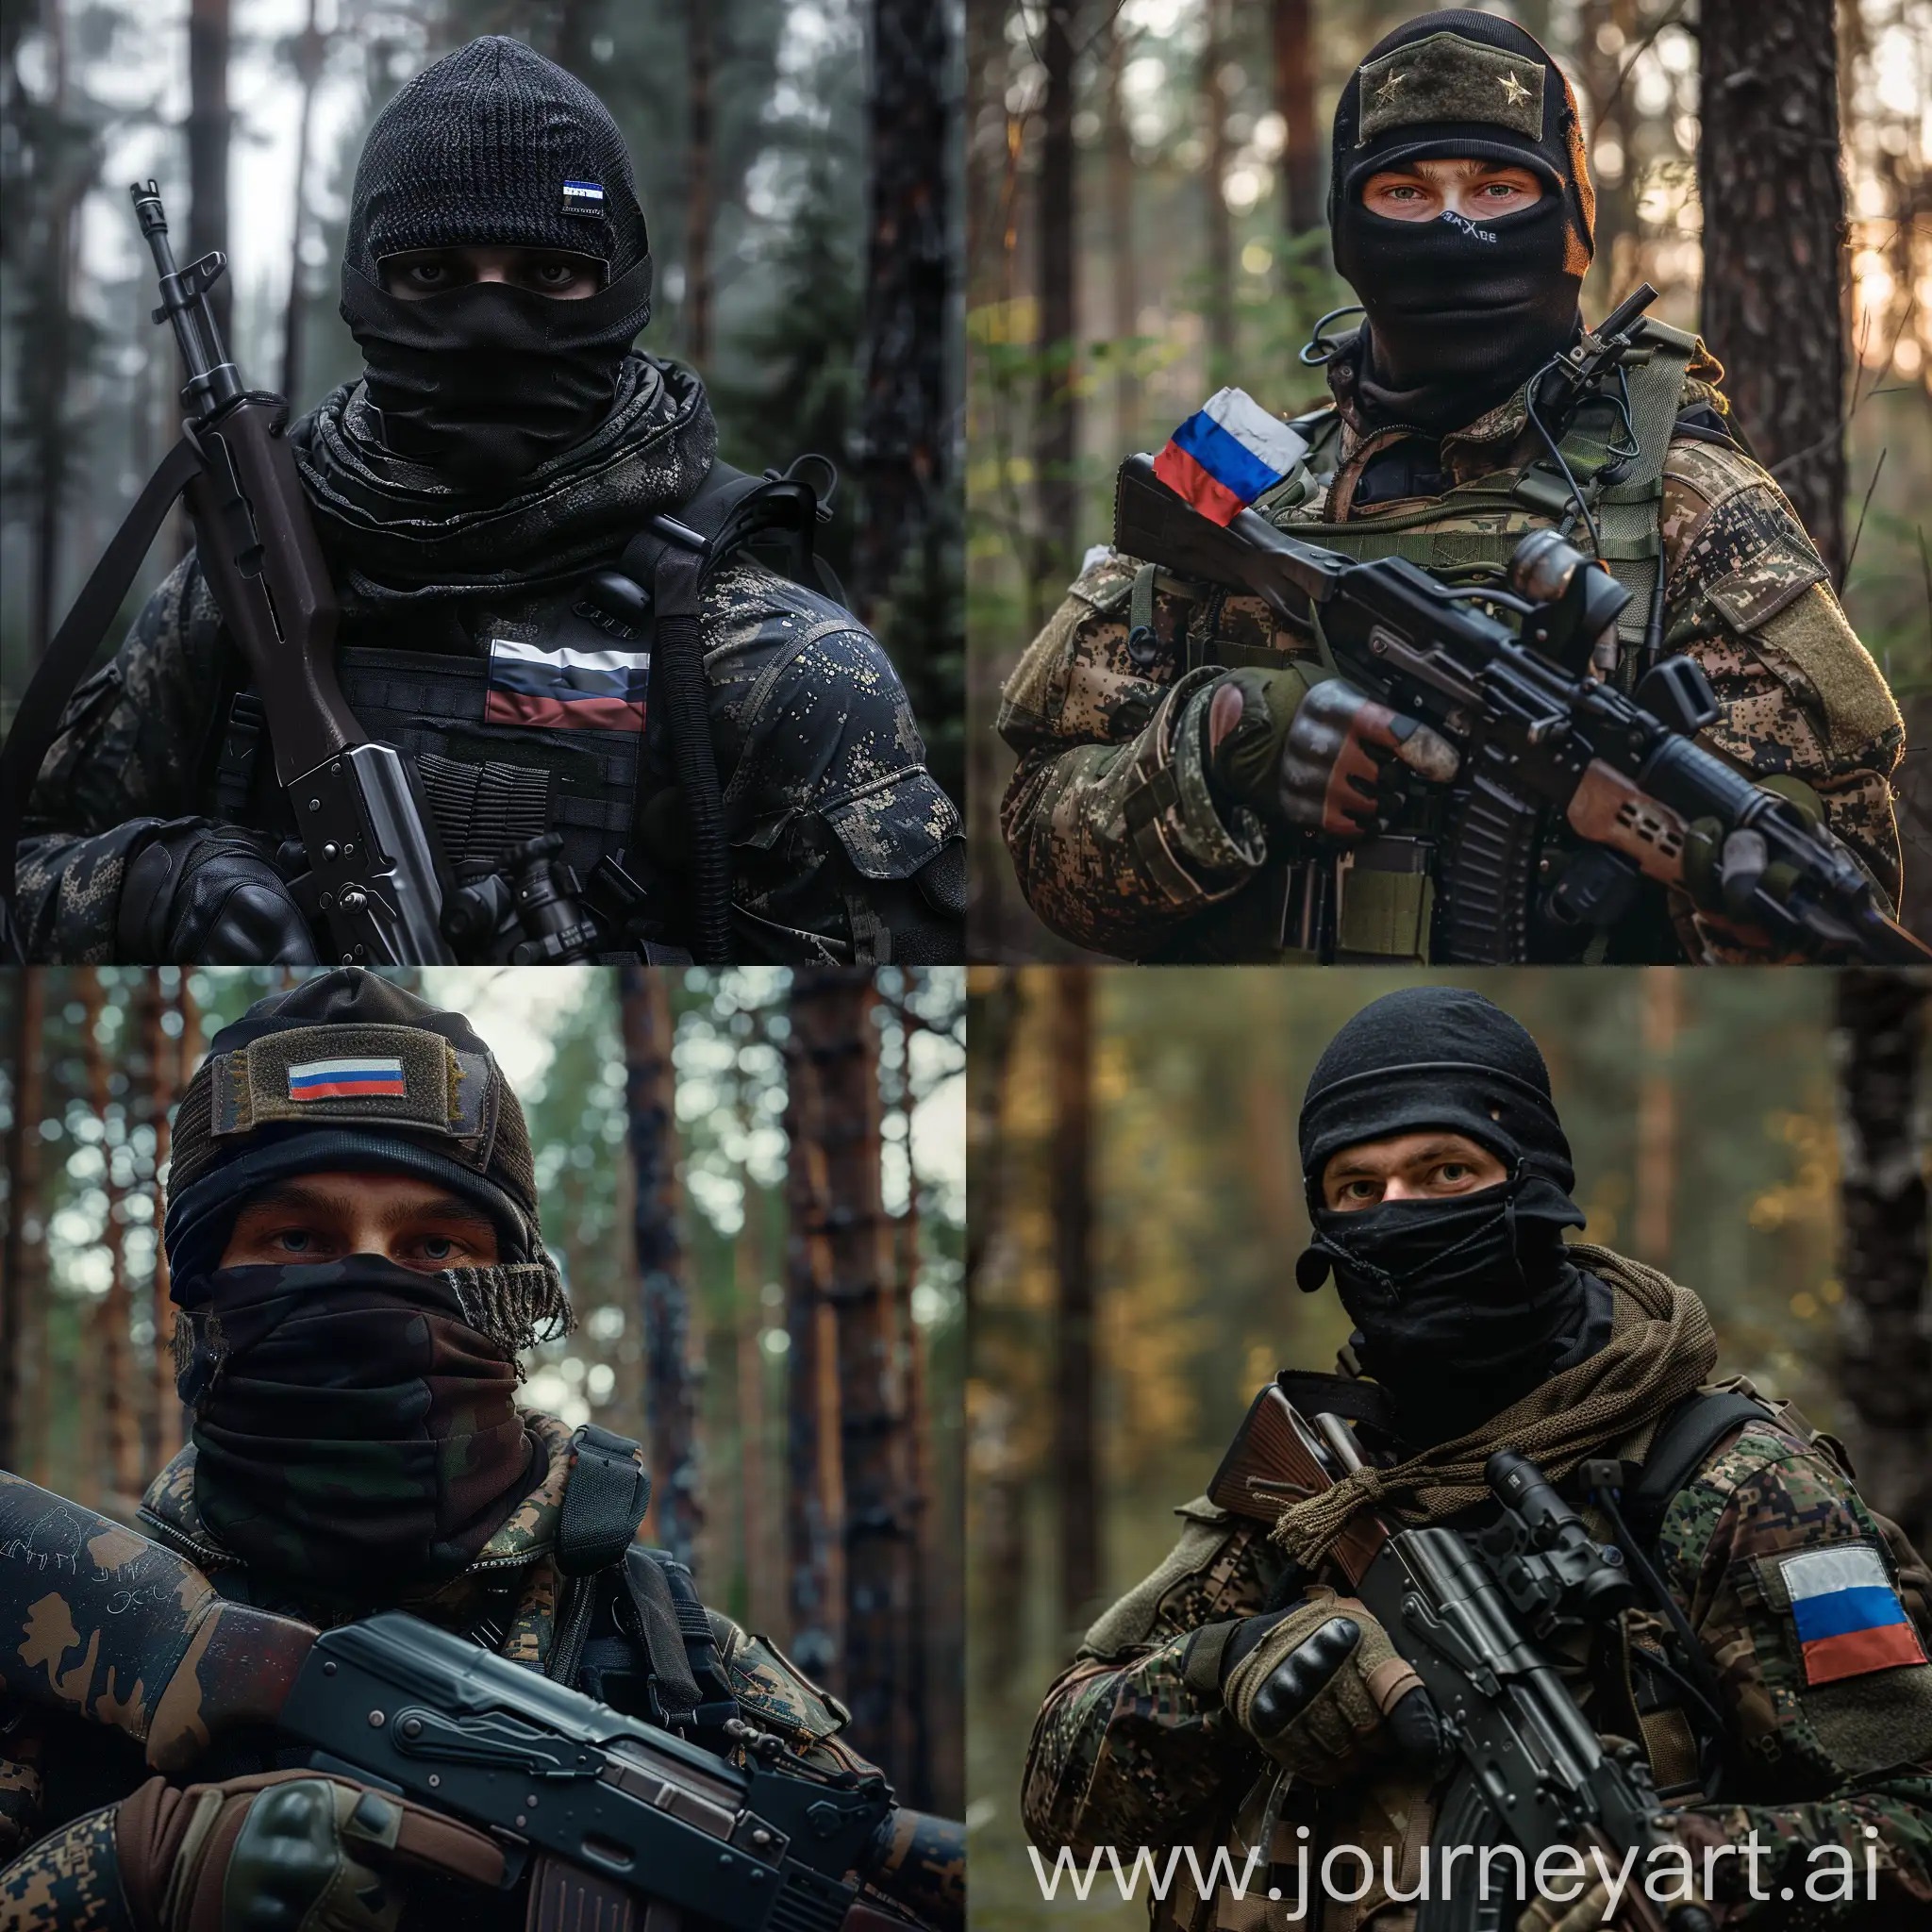 Russian-Soldier-in-Camouflage-with-Kalashnikov-Rifle